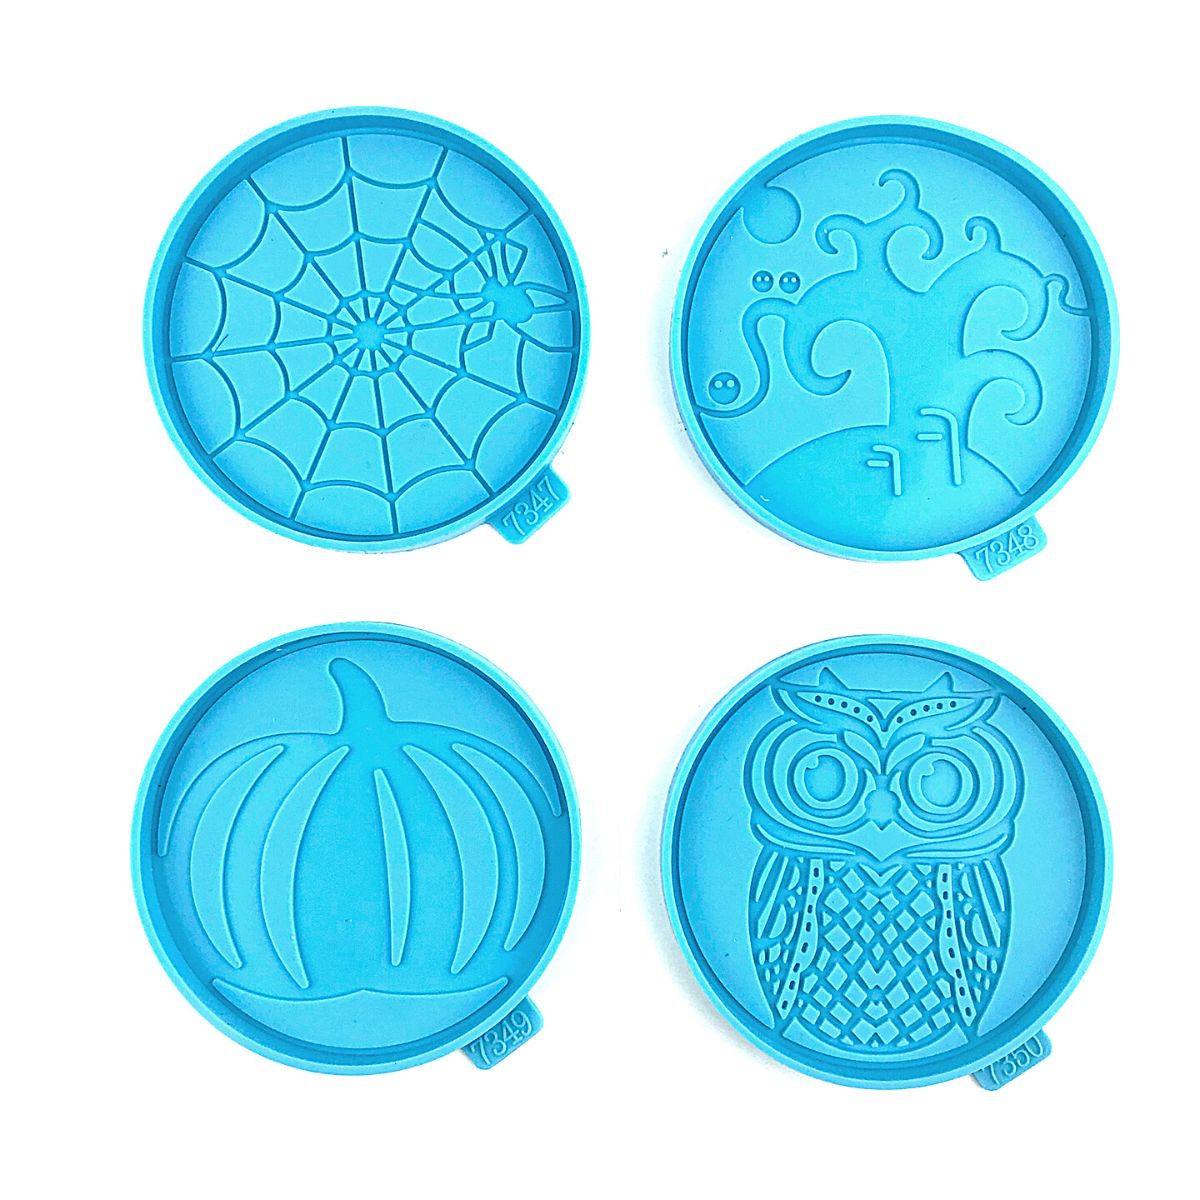 Round Silicone Coaster Mold For Resin Art, Tree Design